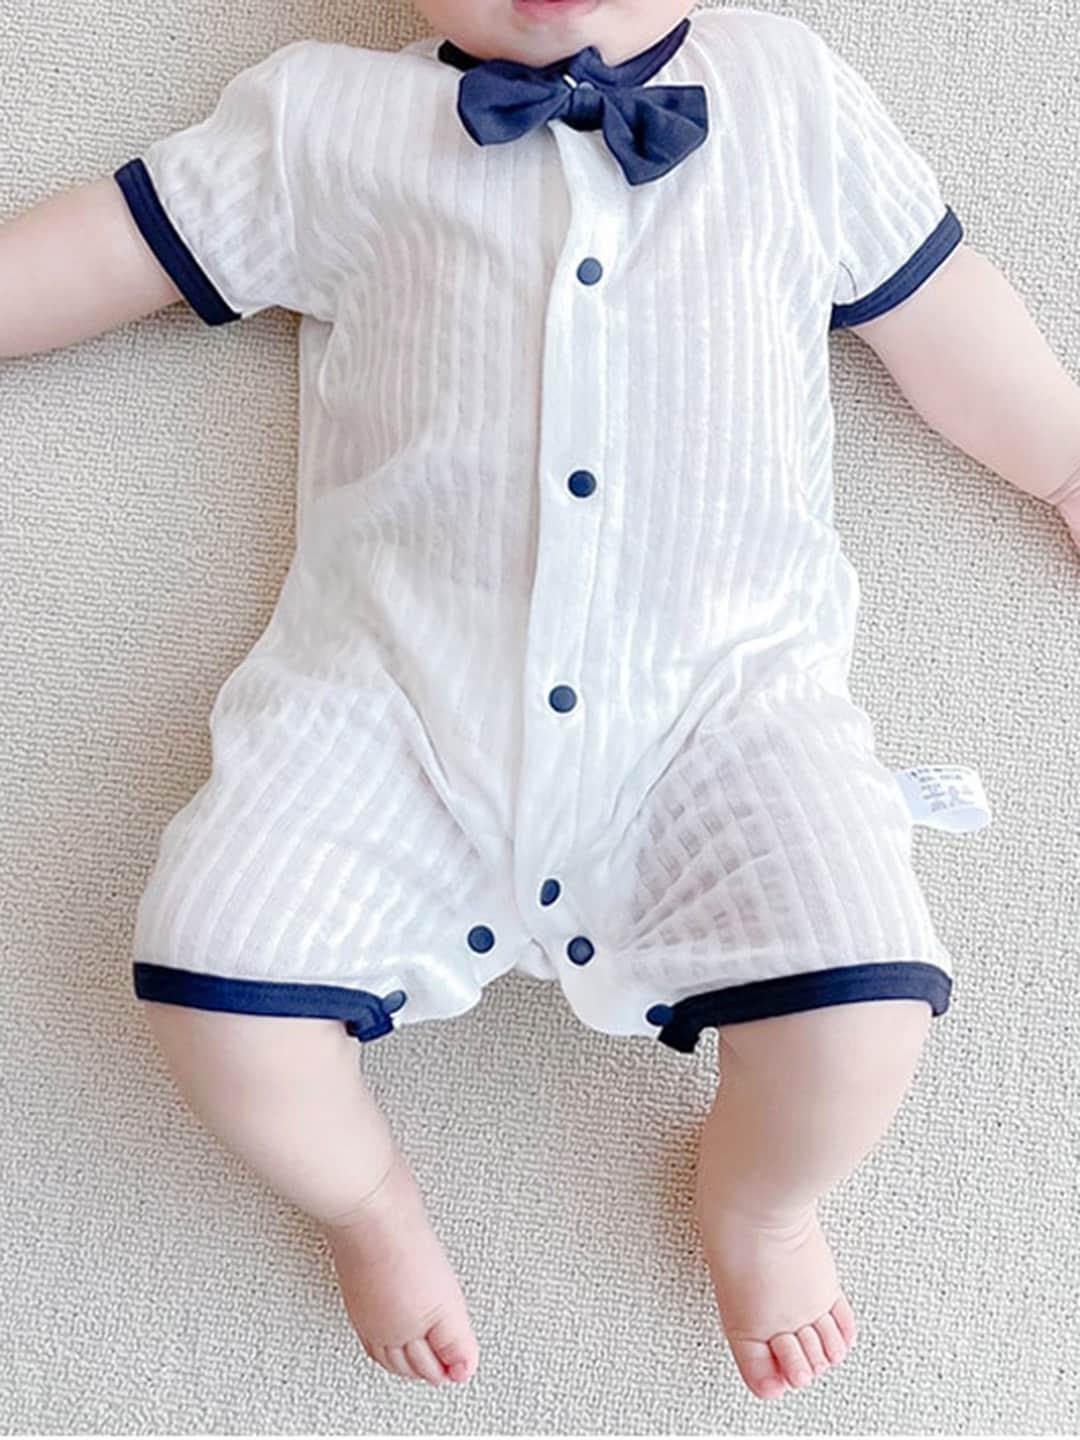 stylecast-infant-boys-white-striped-cotton-rompers